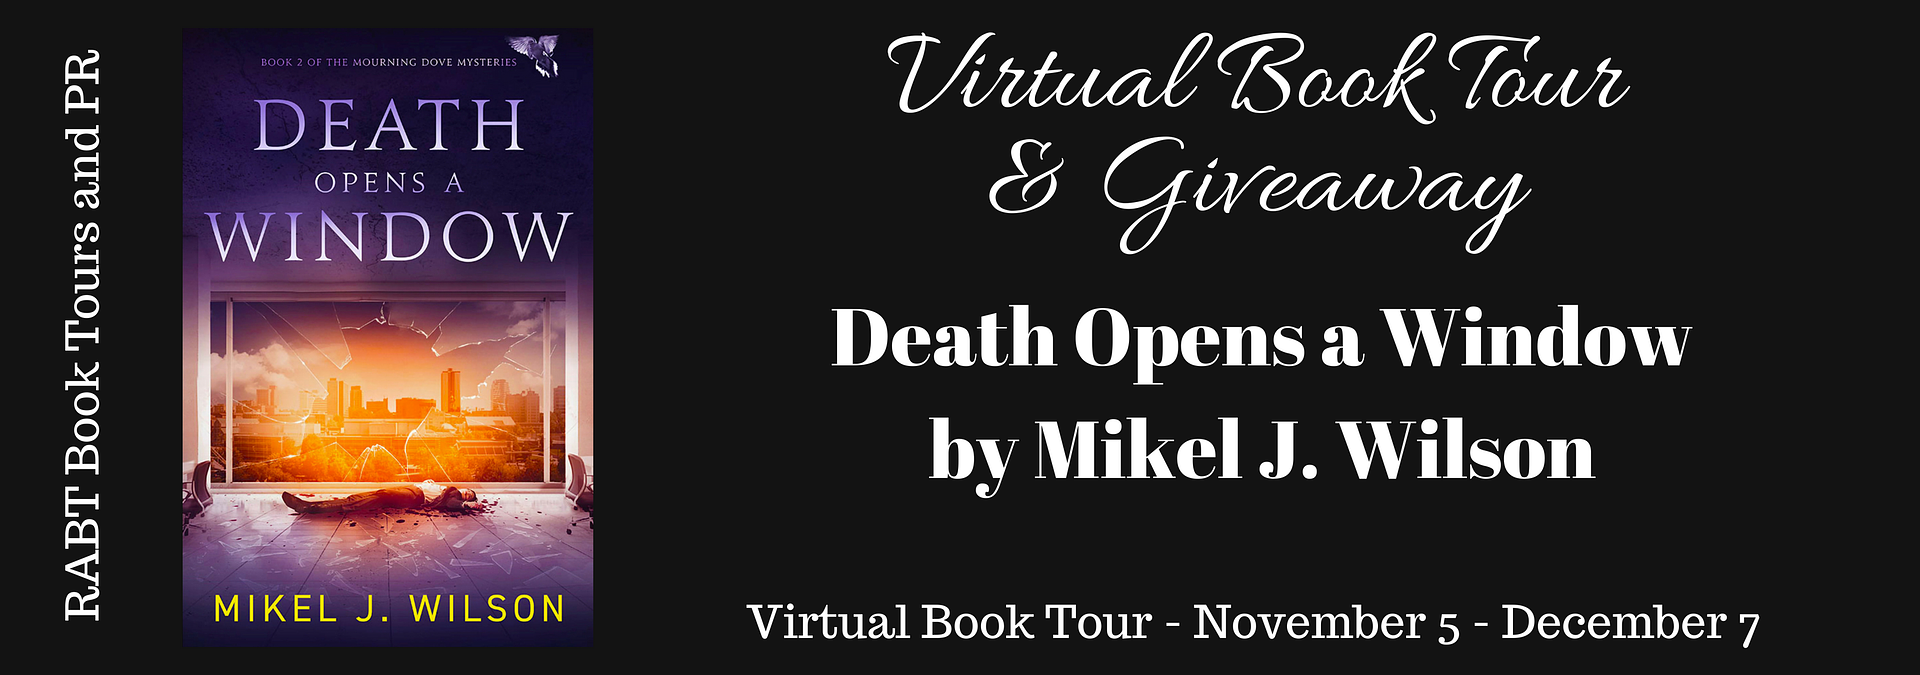 Virtual Book Tour & Interview with Author @mikeljwilson during the Death Opens a Window Book Tour #giveaway #interview @RABTBookTours